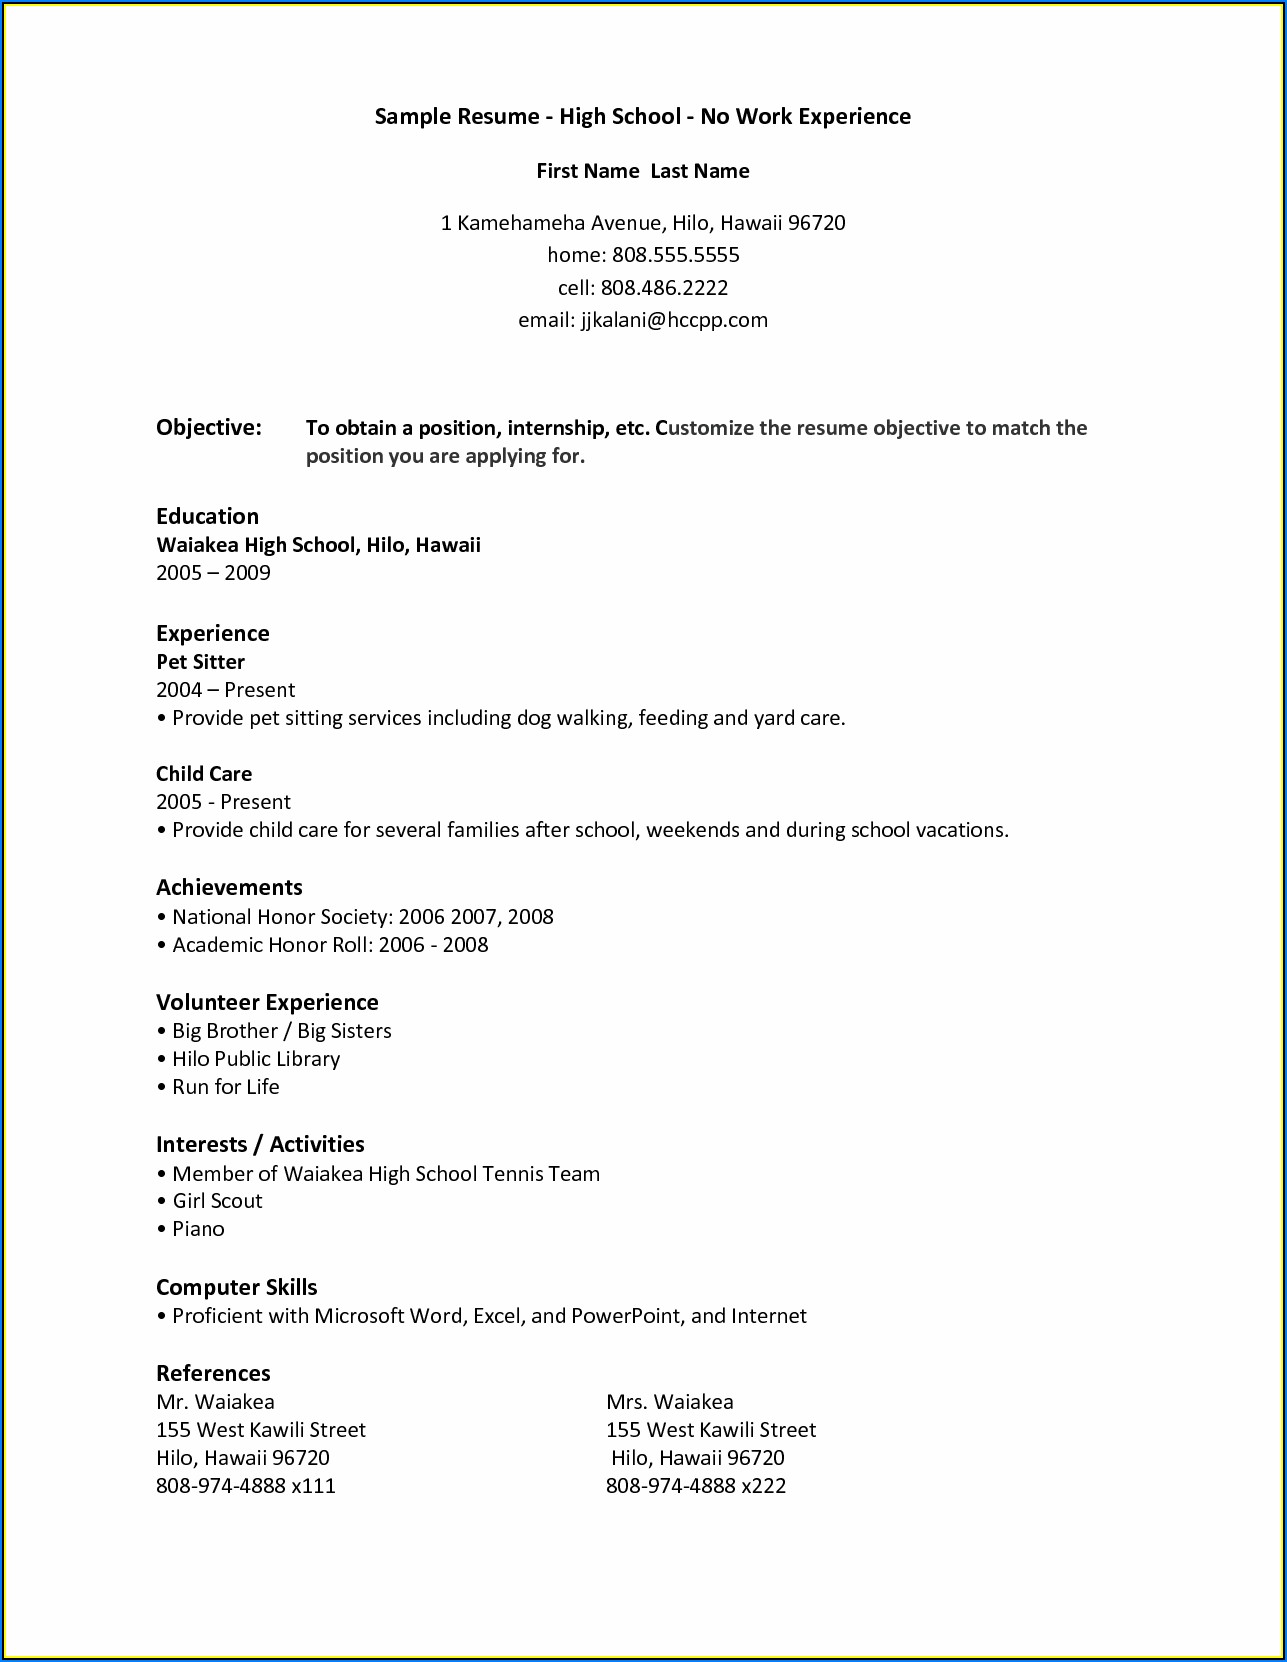 Resume Templates For Students In High School With No Experience